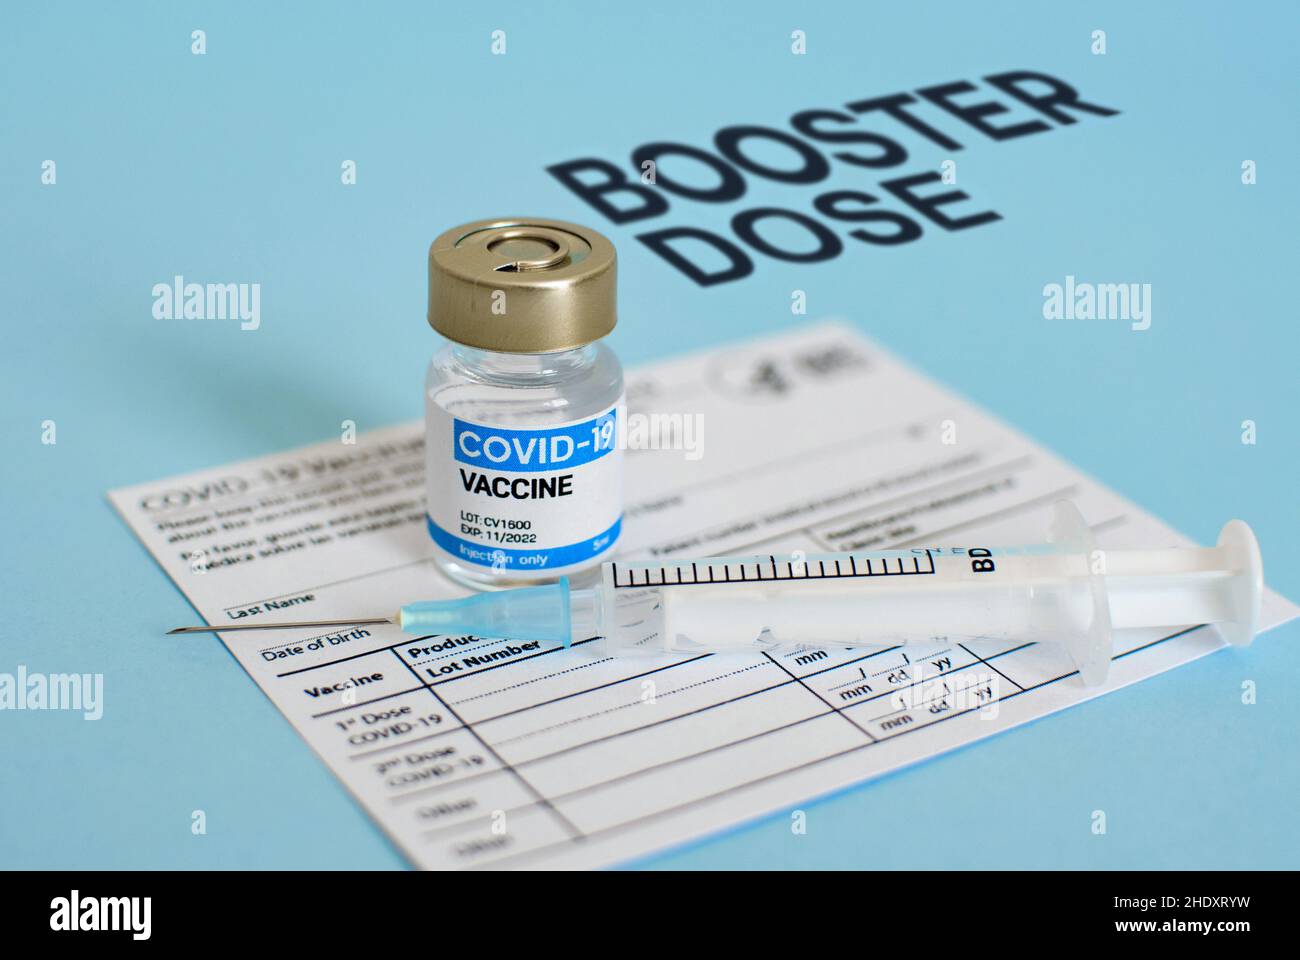 Close-up image of vaccine vial and syringe on CDC covid-19 vaccination record card. Stock Photo